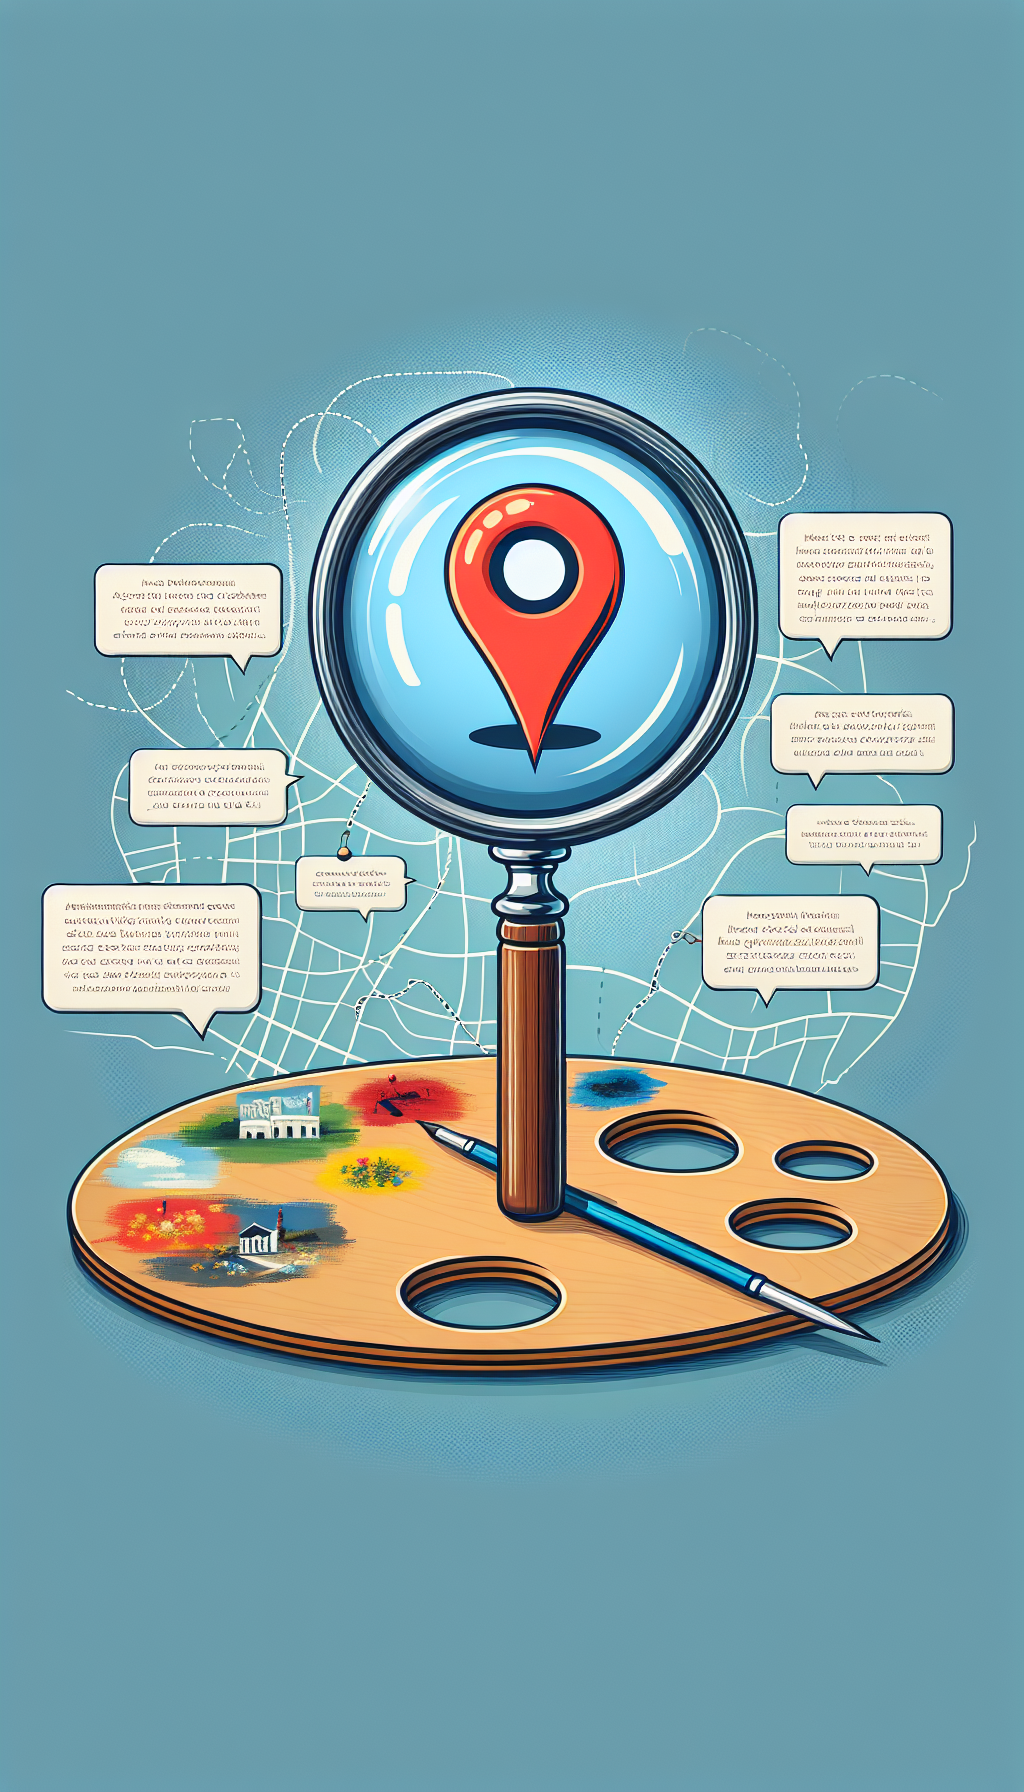 An illustration showing a magnifying glass looming over a palette, with a map pinpoint icon merging into the glass handle, symbolizing the local aspect of 'artwork appraisal near me.' On the palette, small classic artworks replace the typical paint blobs, each connected to text bubbles with concise appraisal tips, suggesting the journey from novice interest to expert understanding in preparation for an appraisal.